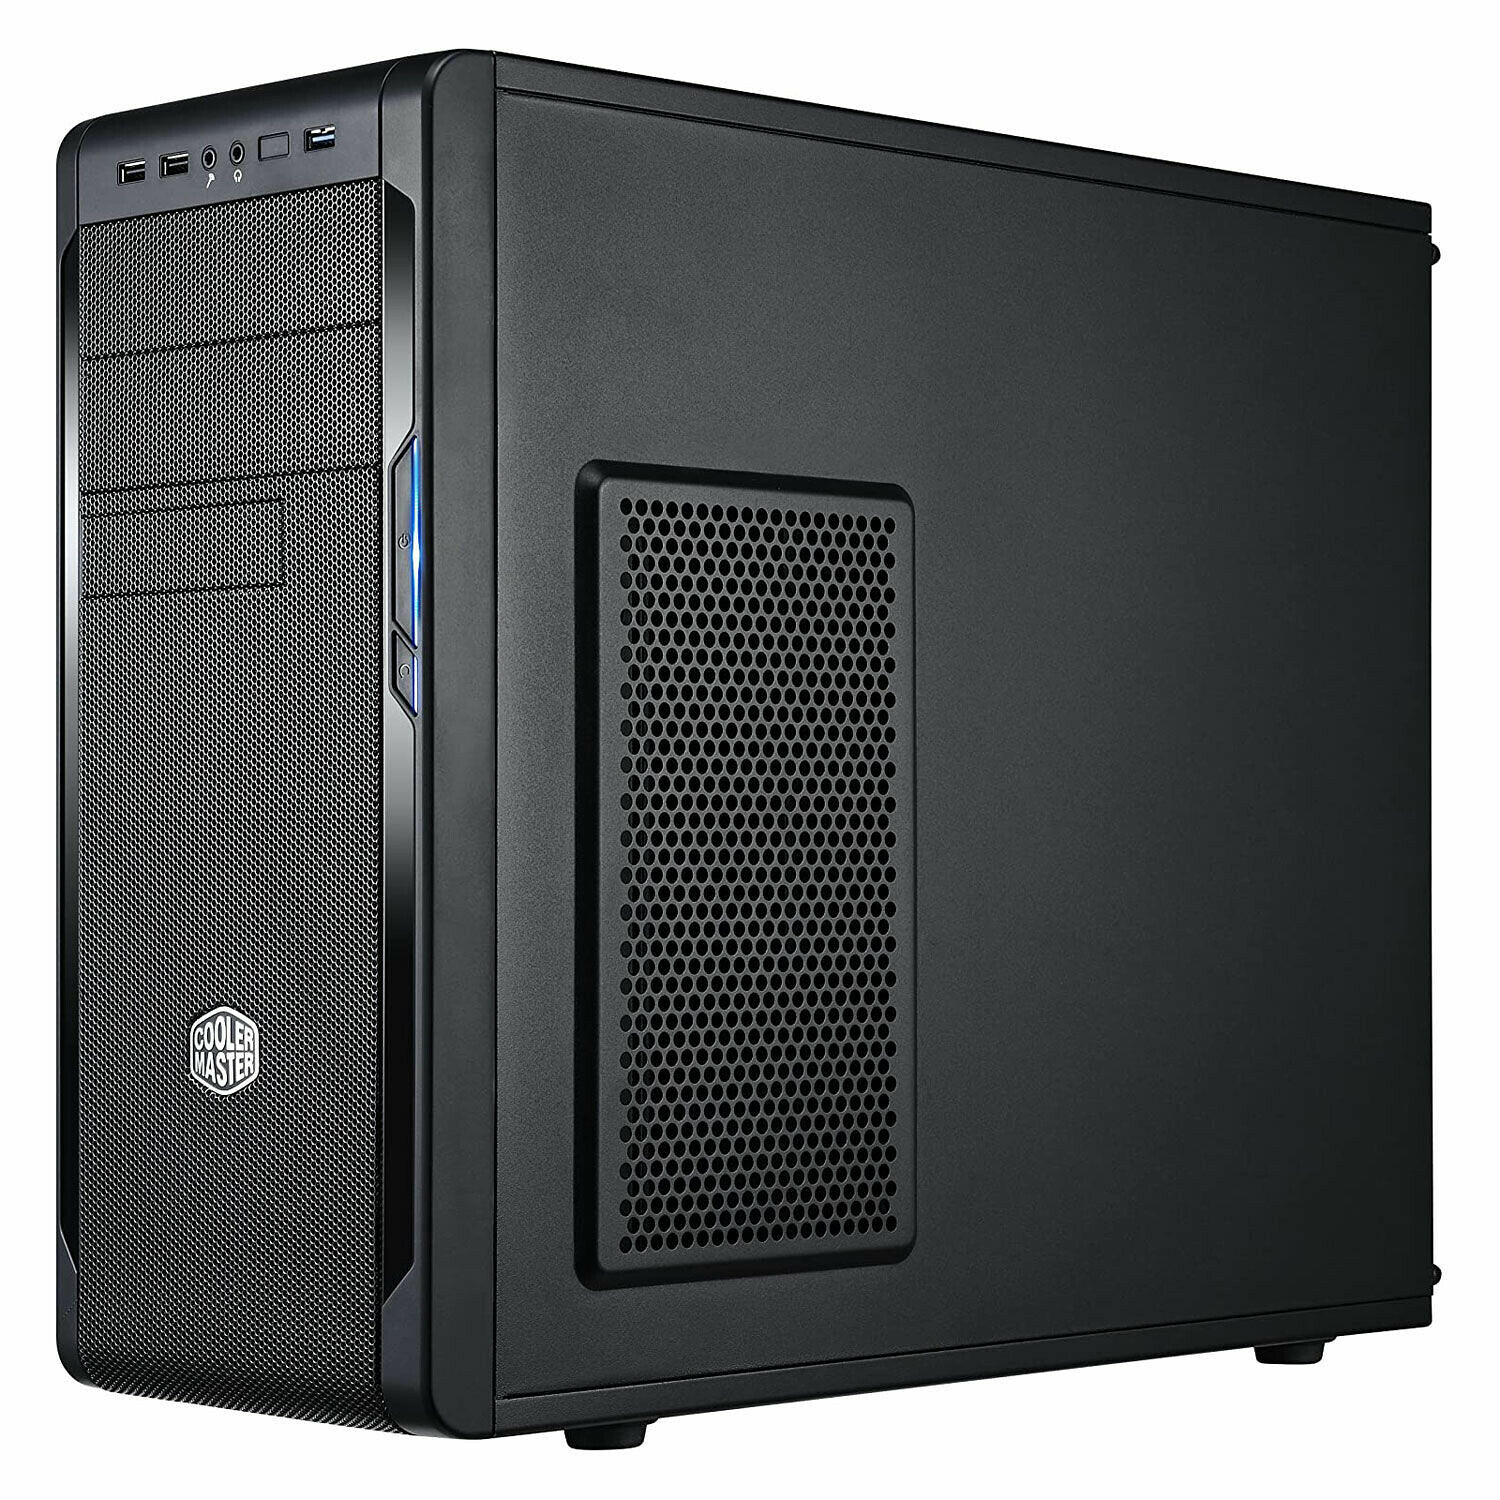 Cooler Master N300 - Boitier PC - Top Achat